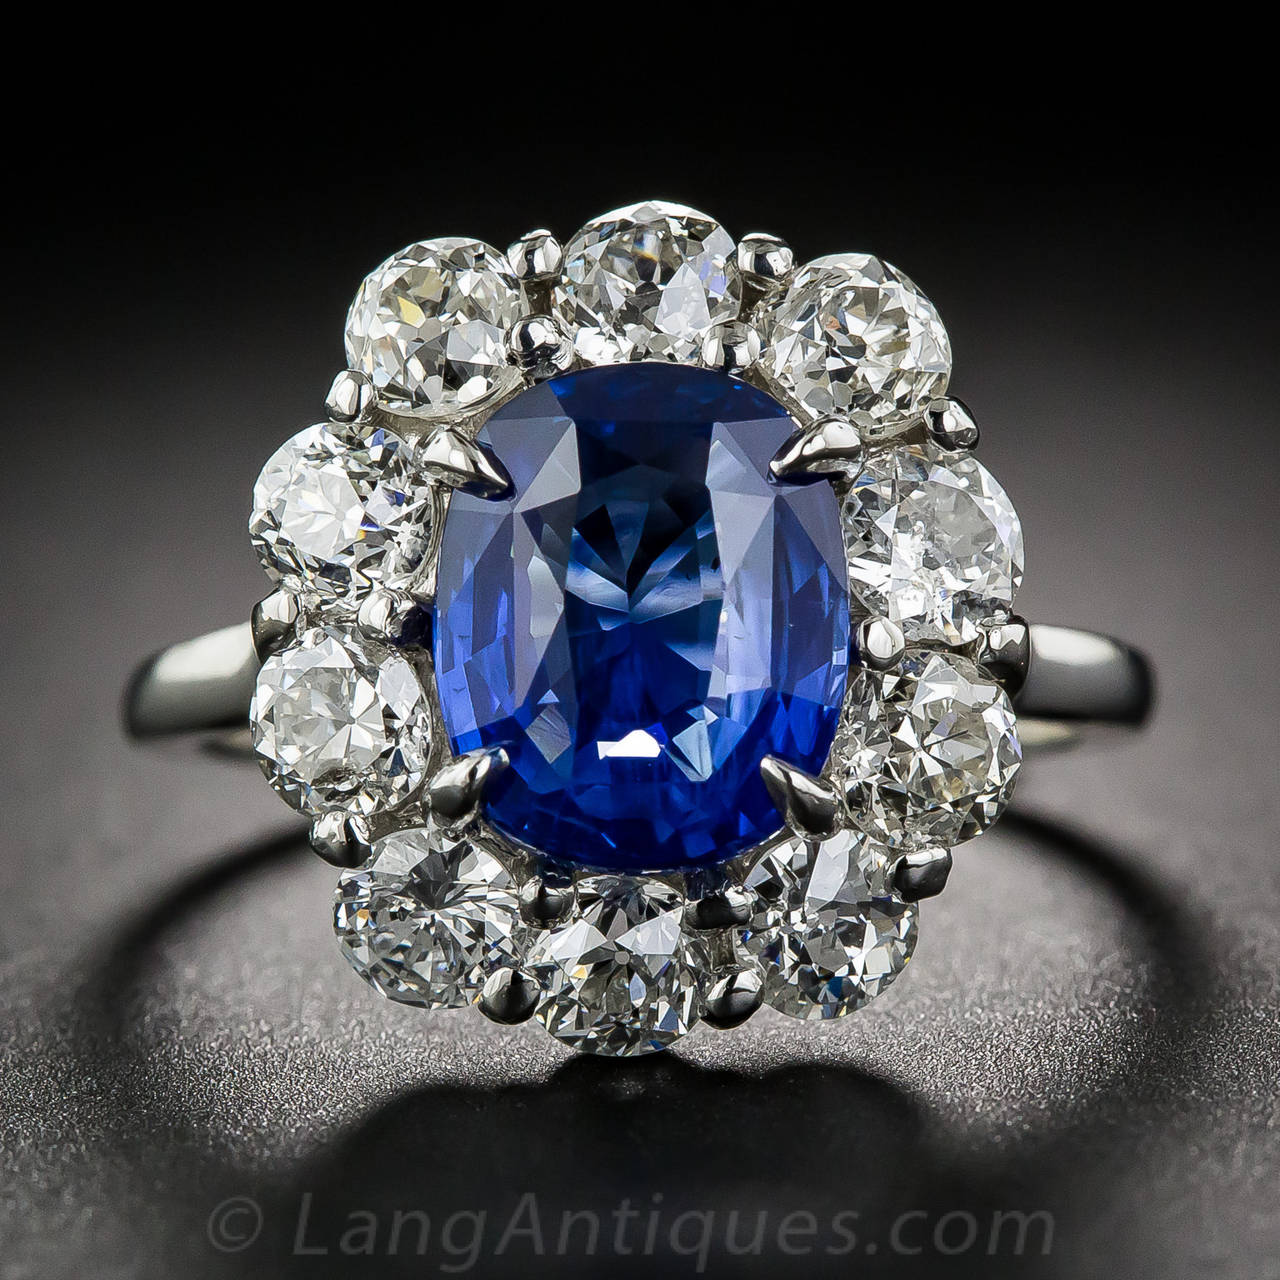 From early twentieth-century France comes this classic halo ring featuring a gorgeous, natural, no-heat sapphire, weighing 3.51 carats. The faceted, velvety royal-blue gemstone radiates from within a sparkling halo of bright, high-color old mine-cut